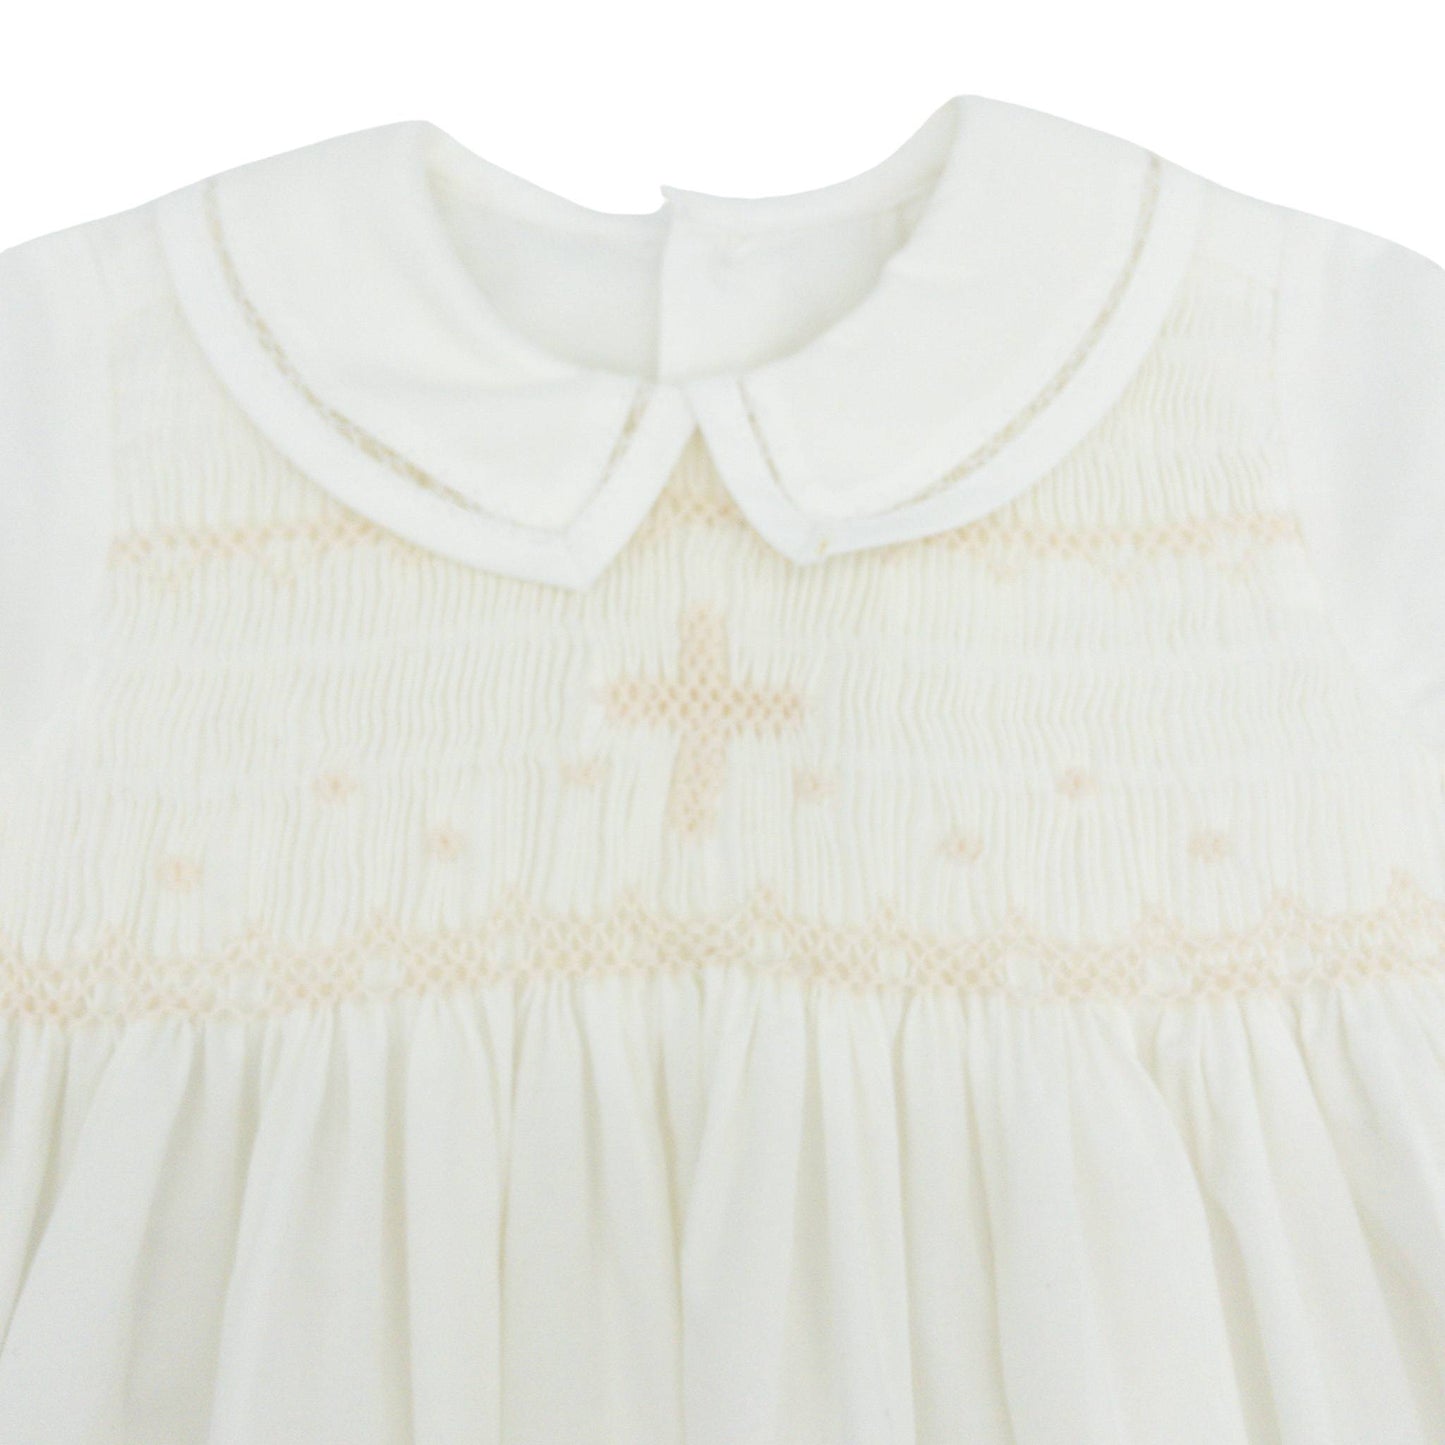 Boys Riley Baptism Gown with Smocked Cross